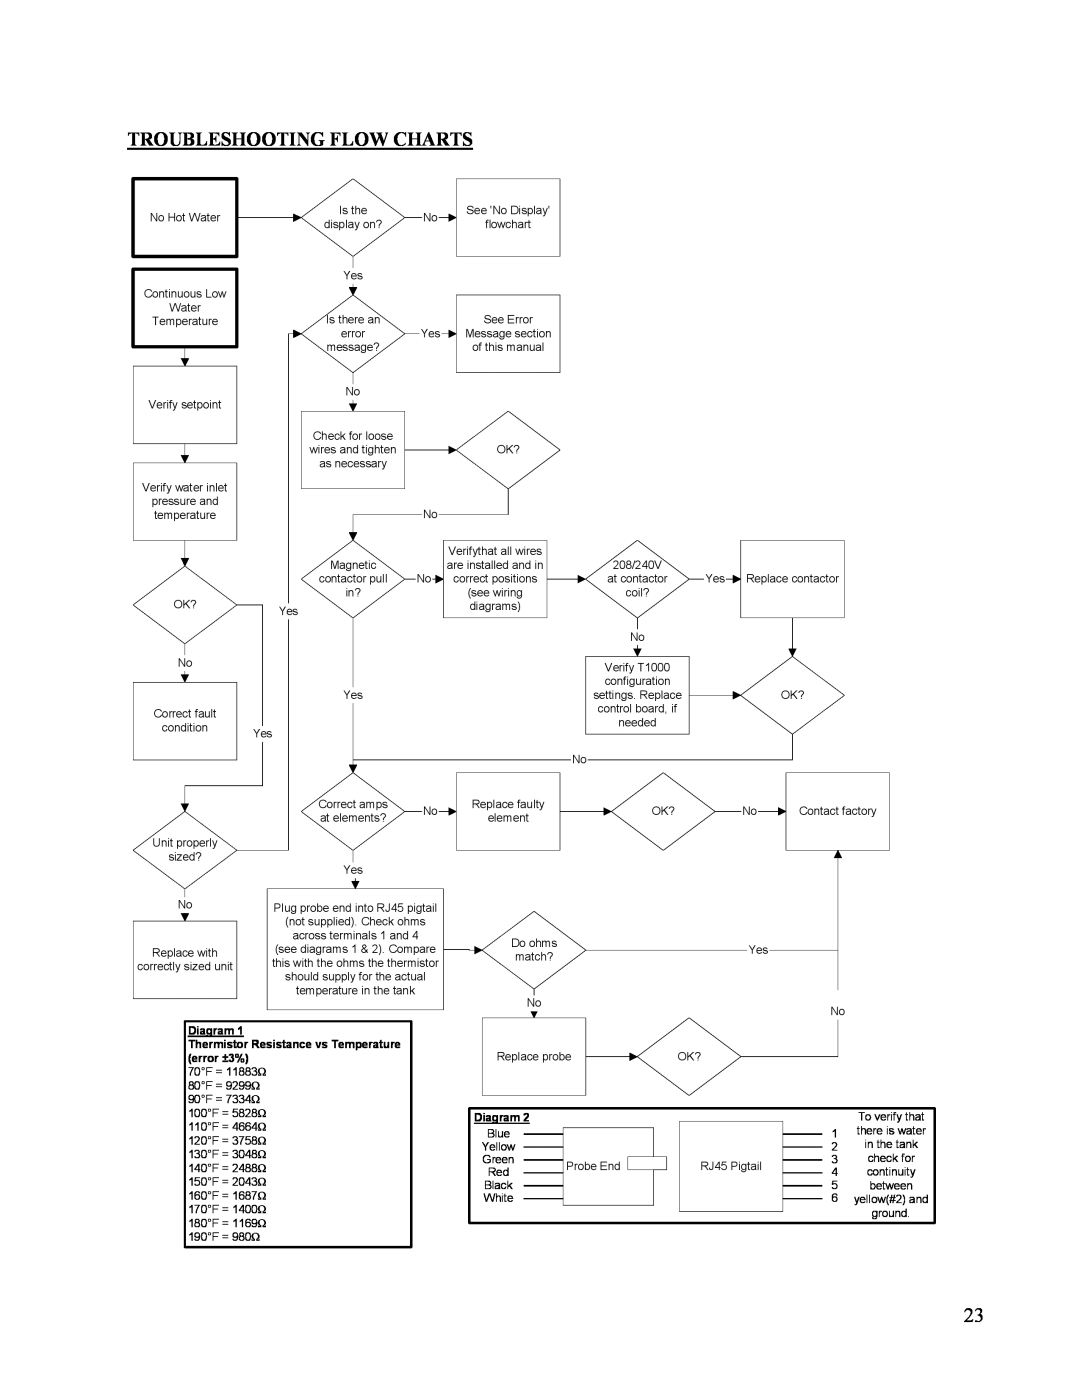 Hubbell Electric Heater Company J Troubleshooting Flow Charts, Diagram, Thermistor Resistance vs Temperature error ±3% 